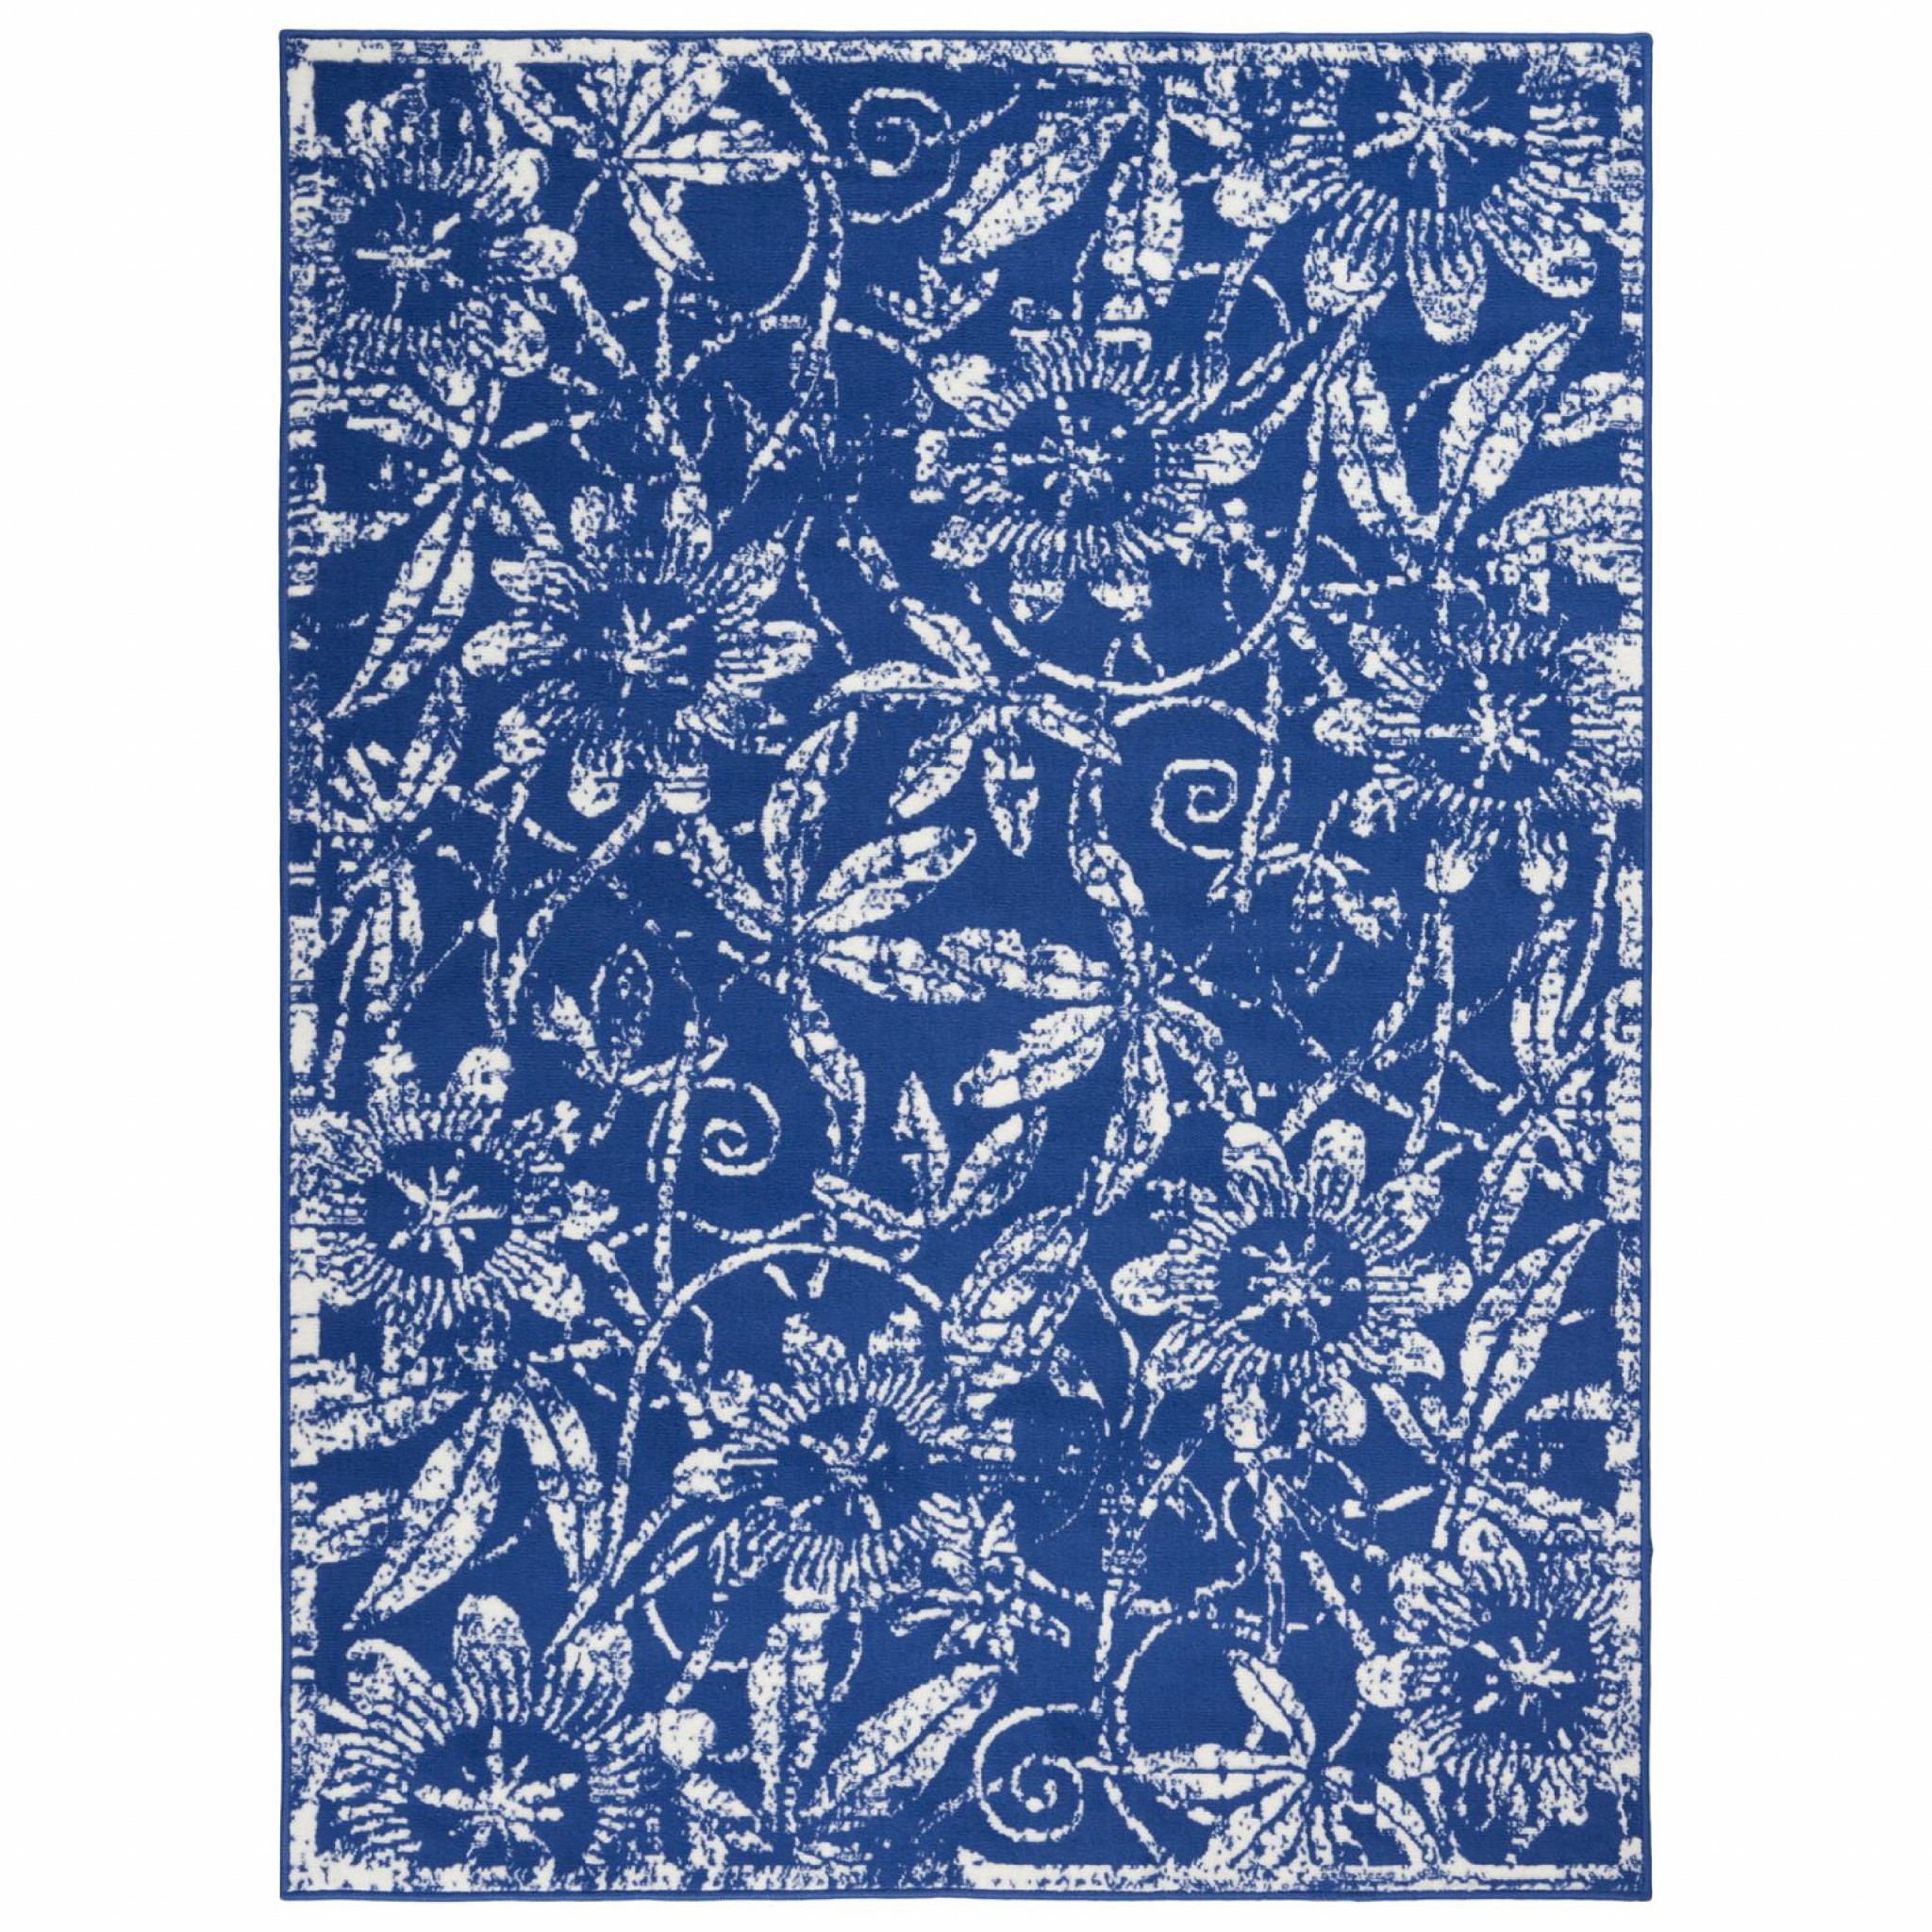 5' X 7' Navy Blue Floral Dhurrie Area Rug-385848-1